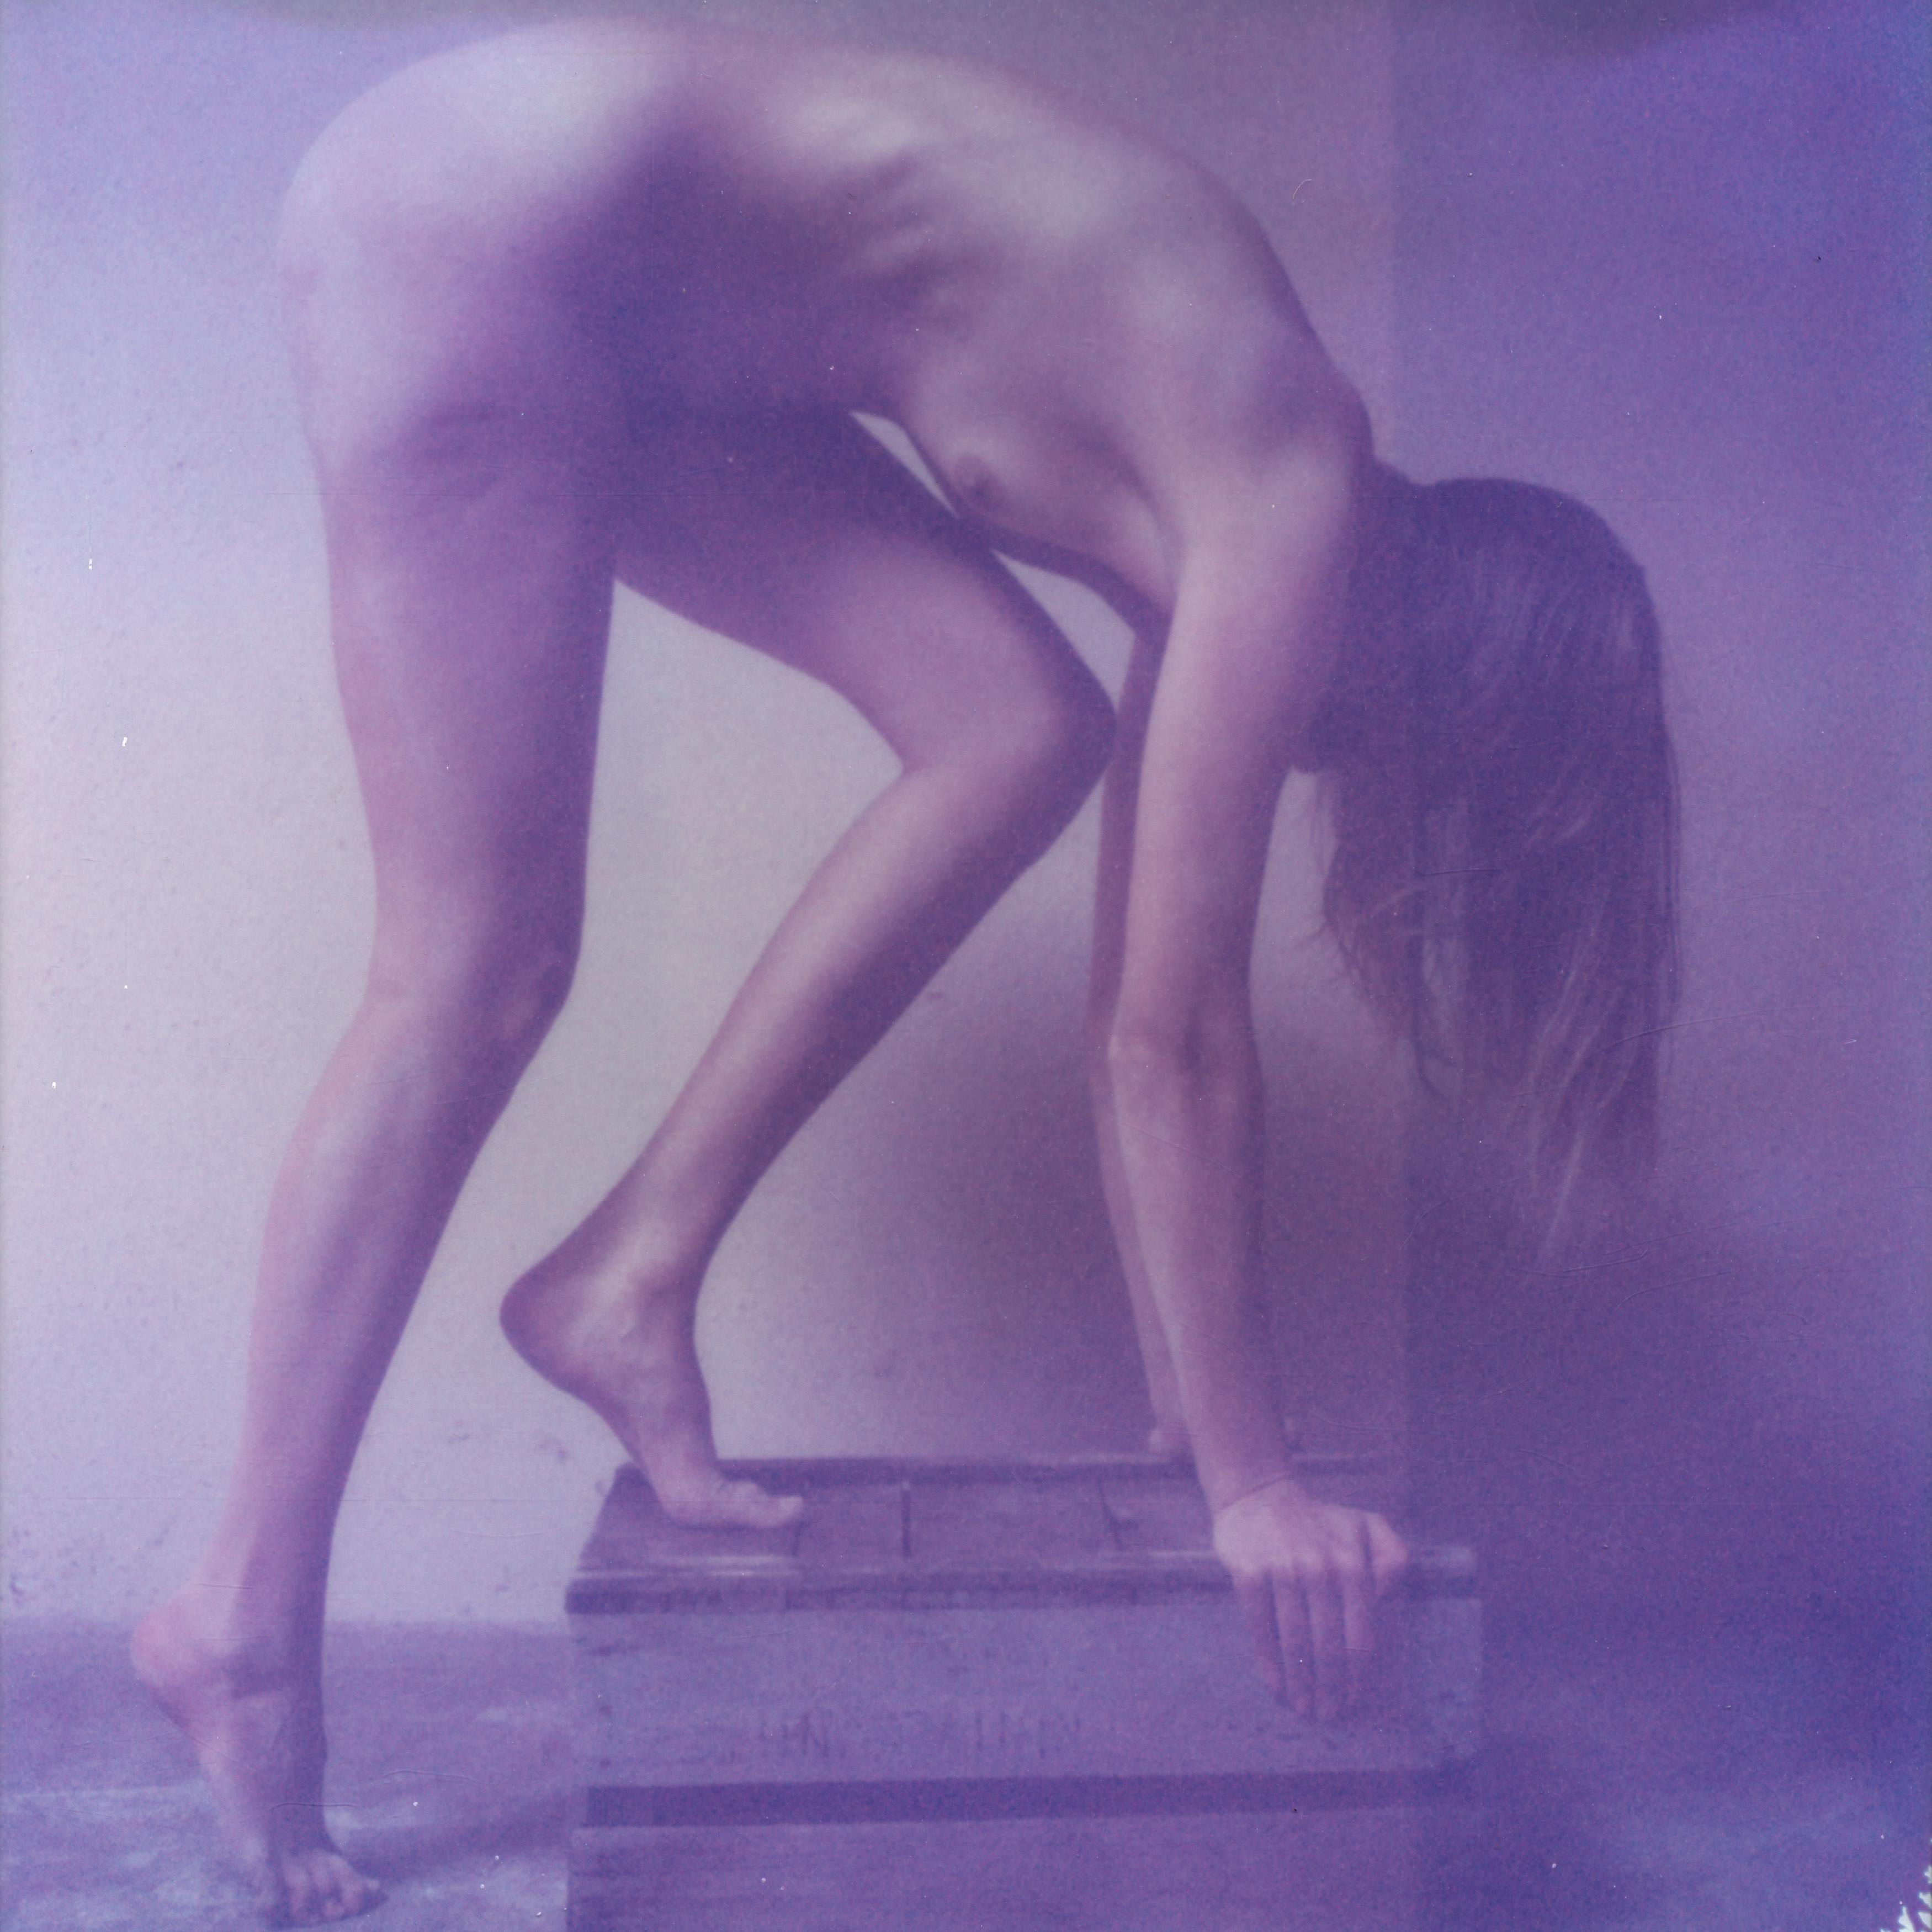 Get up, stand up (get up for your rights) - Polaroid, Farbe, Frauen, 21. Jahrhundert